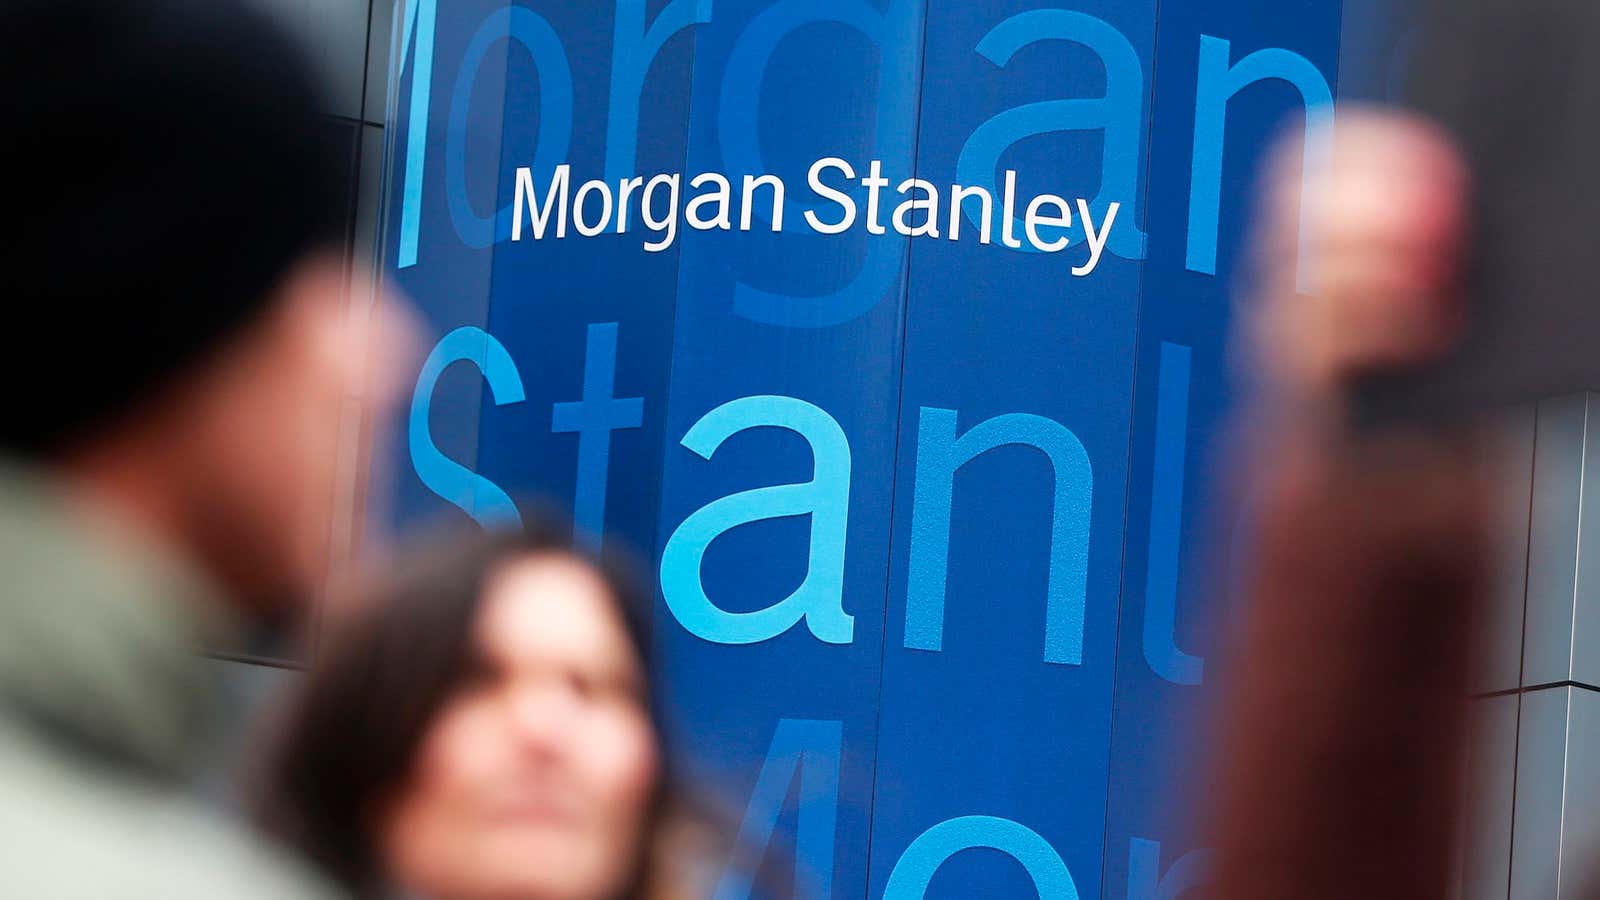 Morgan Stanley is emerging as a different  firm, five years after the financial crisis.